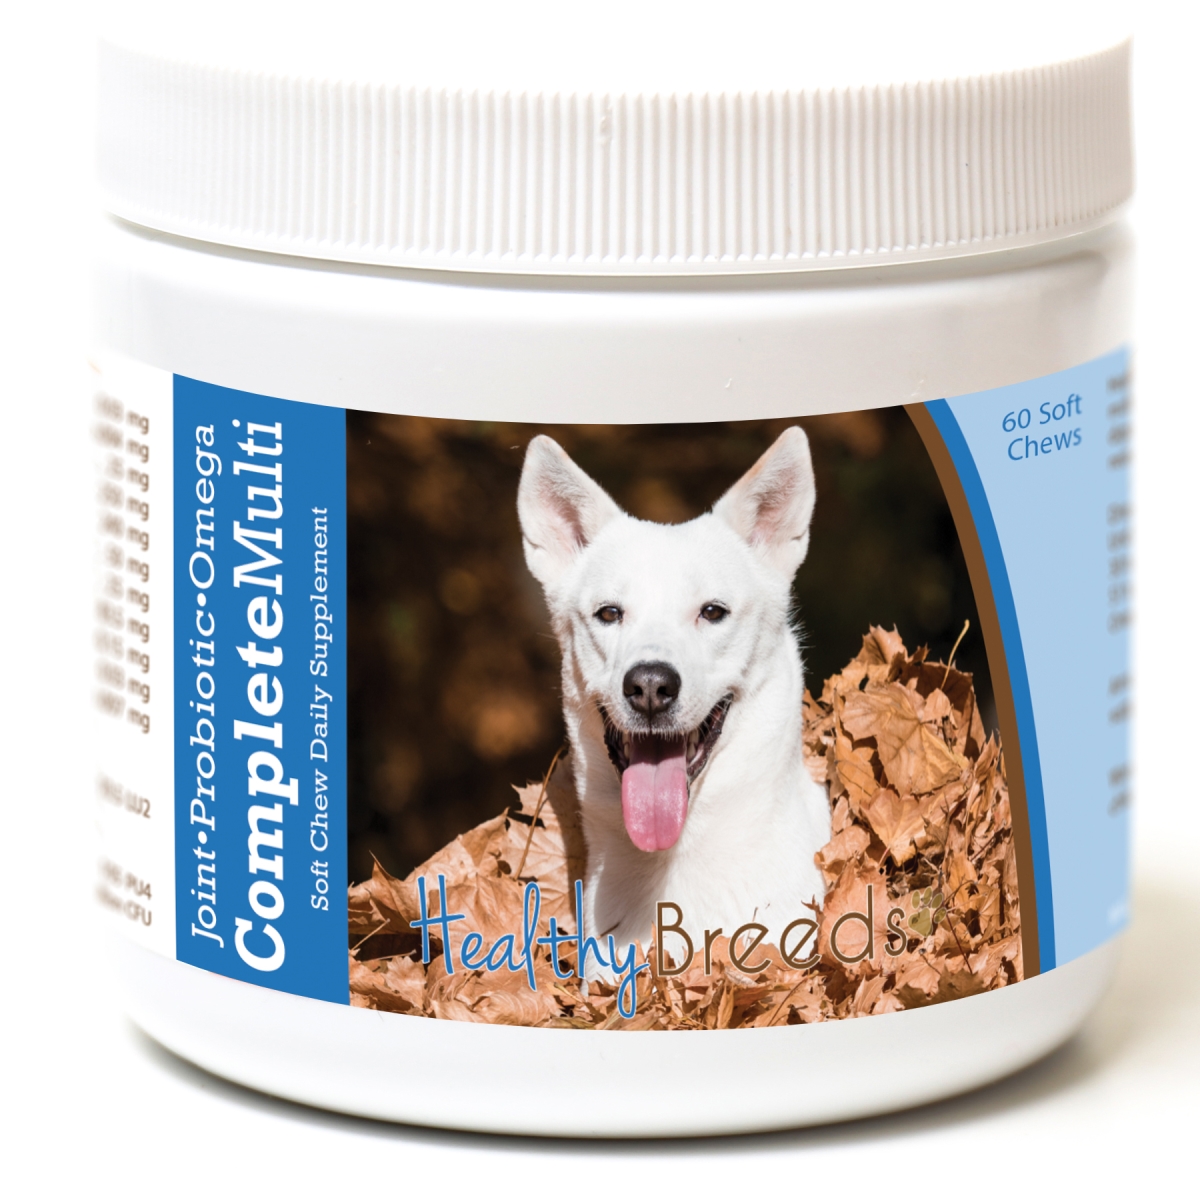 Picture of Healthy Breeds 192959007626 Canaan Dog All in One Multivitamin Soft Chew - 60 Count